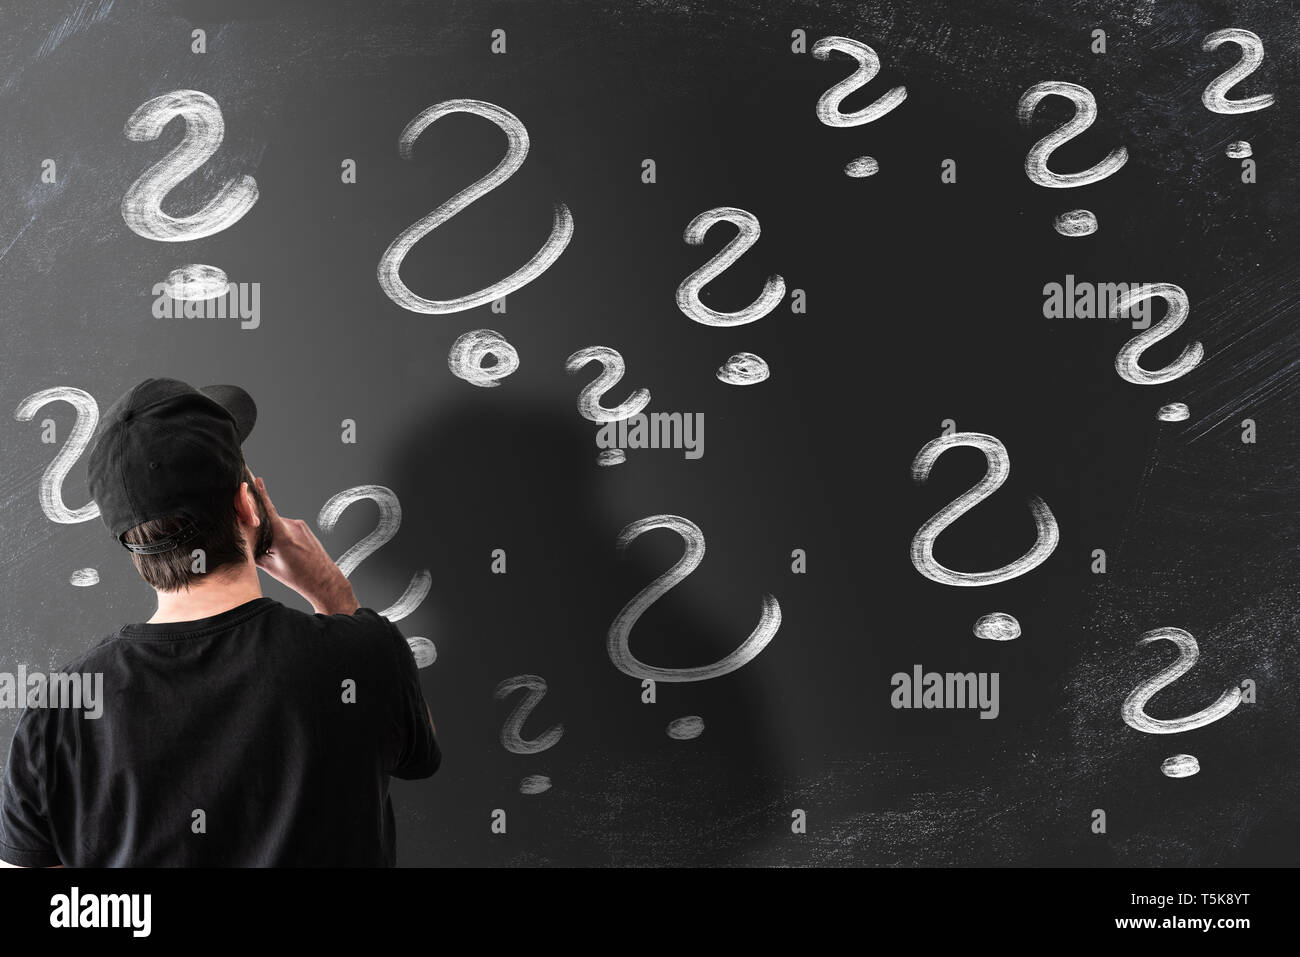 rear view of puzzled man looking at chalkboard or blackboard filled with question marks Stock Photo